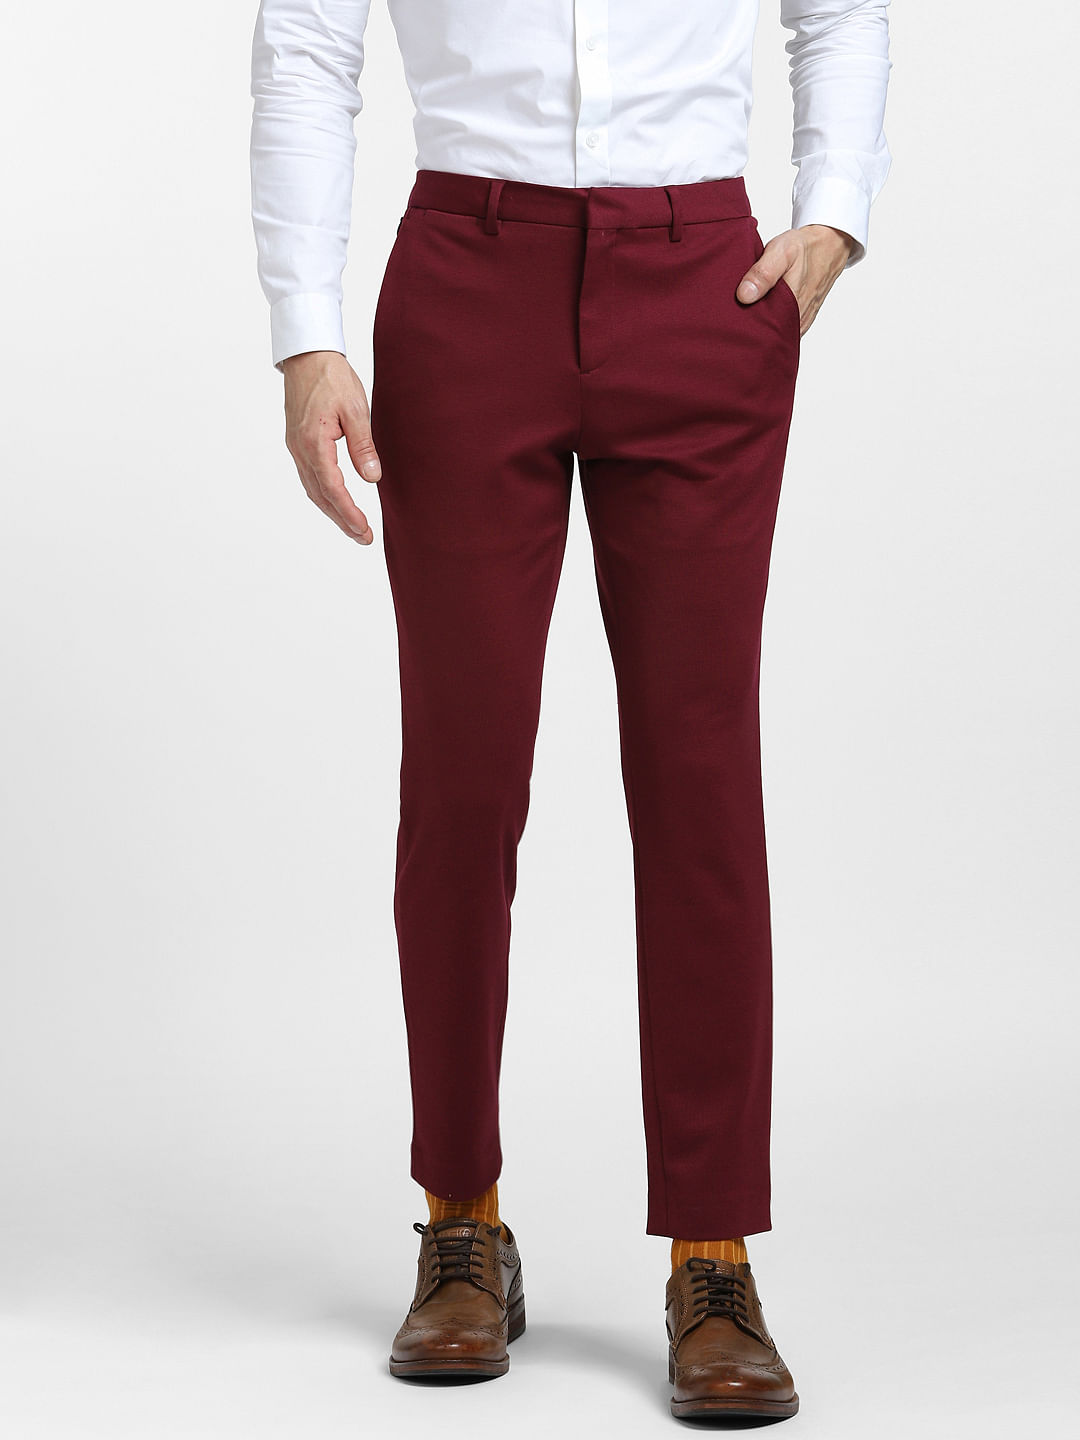 Mens Peanut Lycra Formal Pants Stretchable Trousers Perfect for the  Office and Casual Occasions